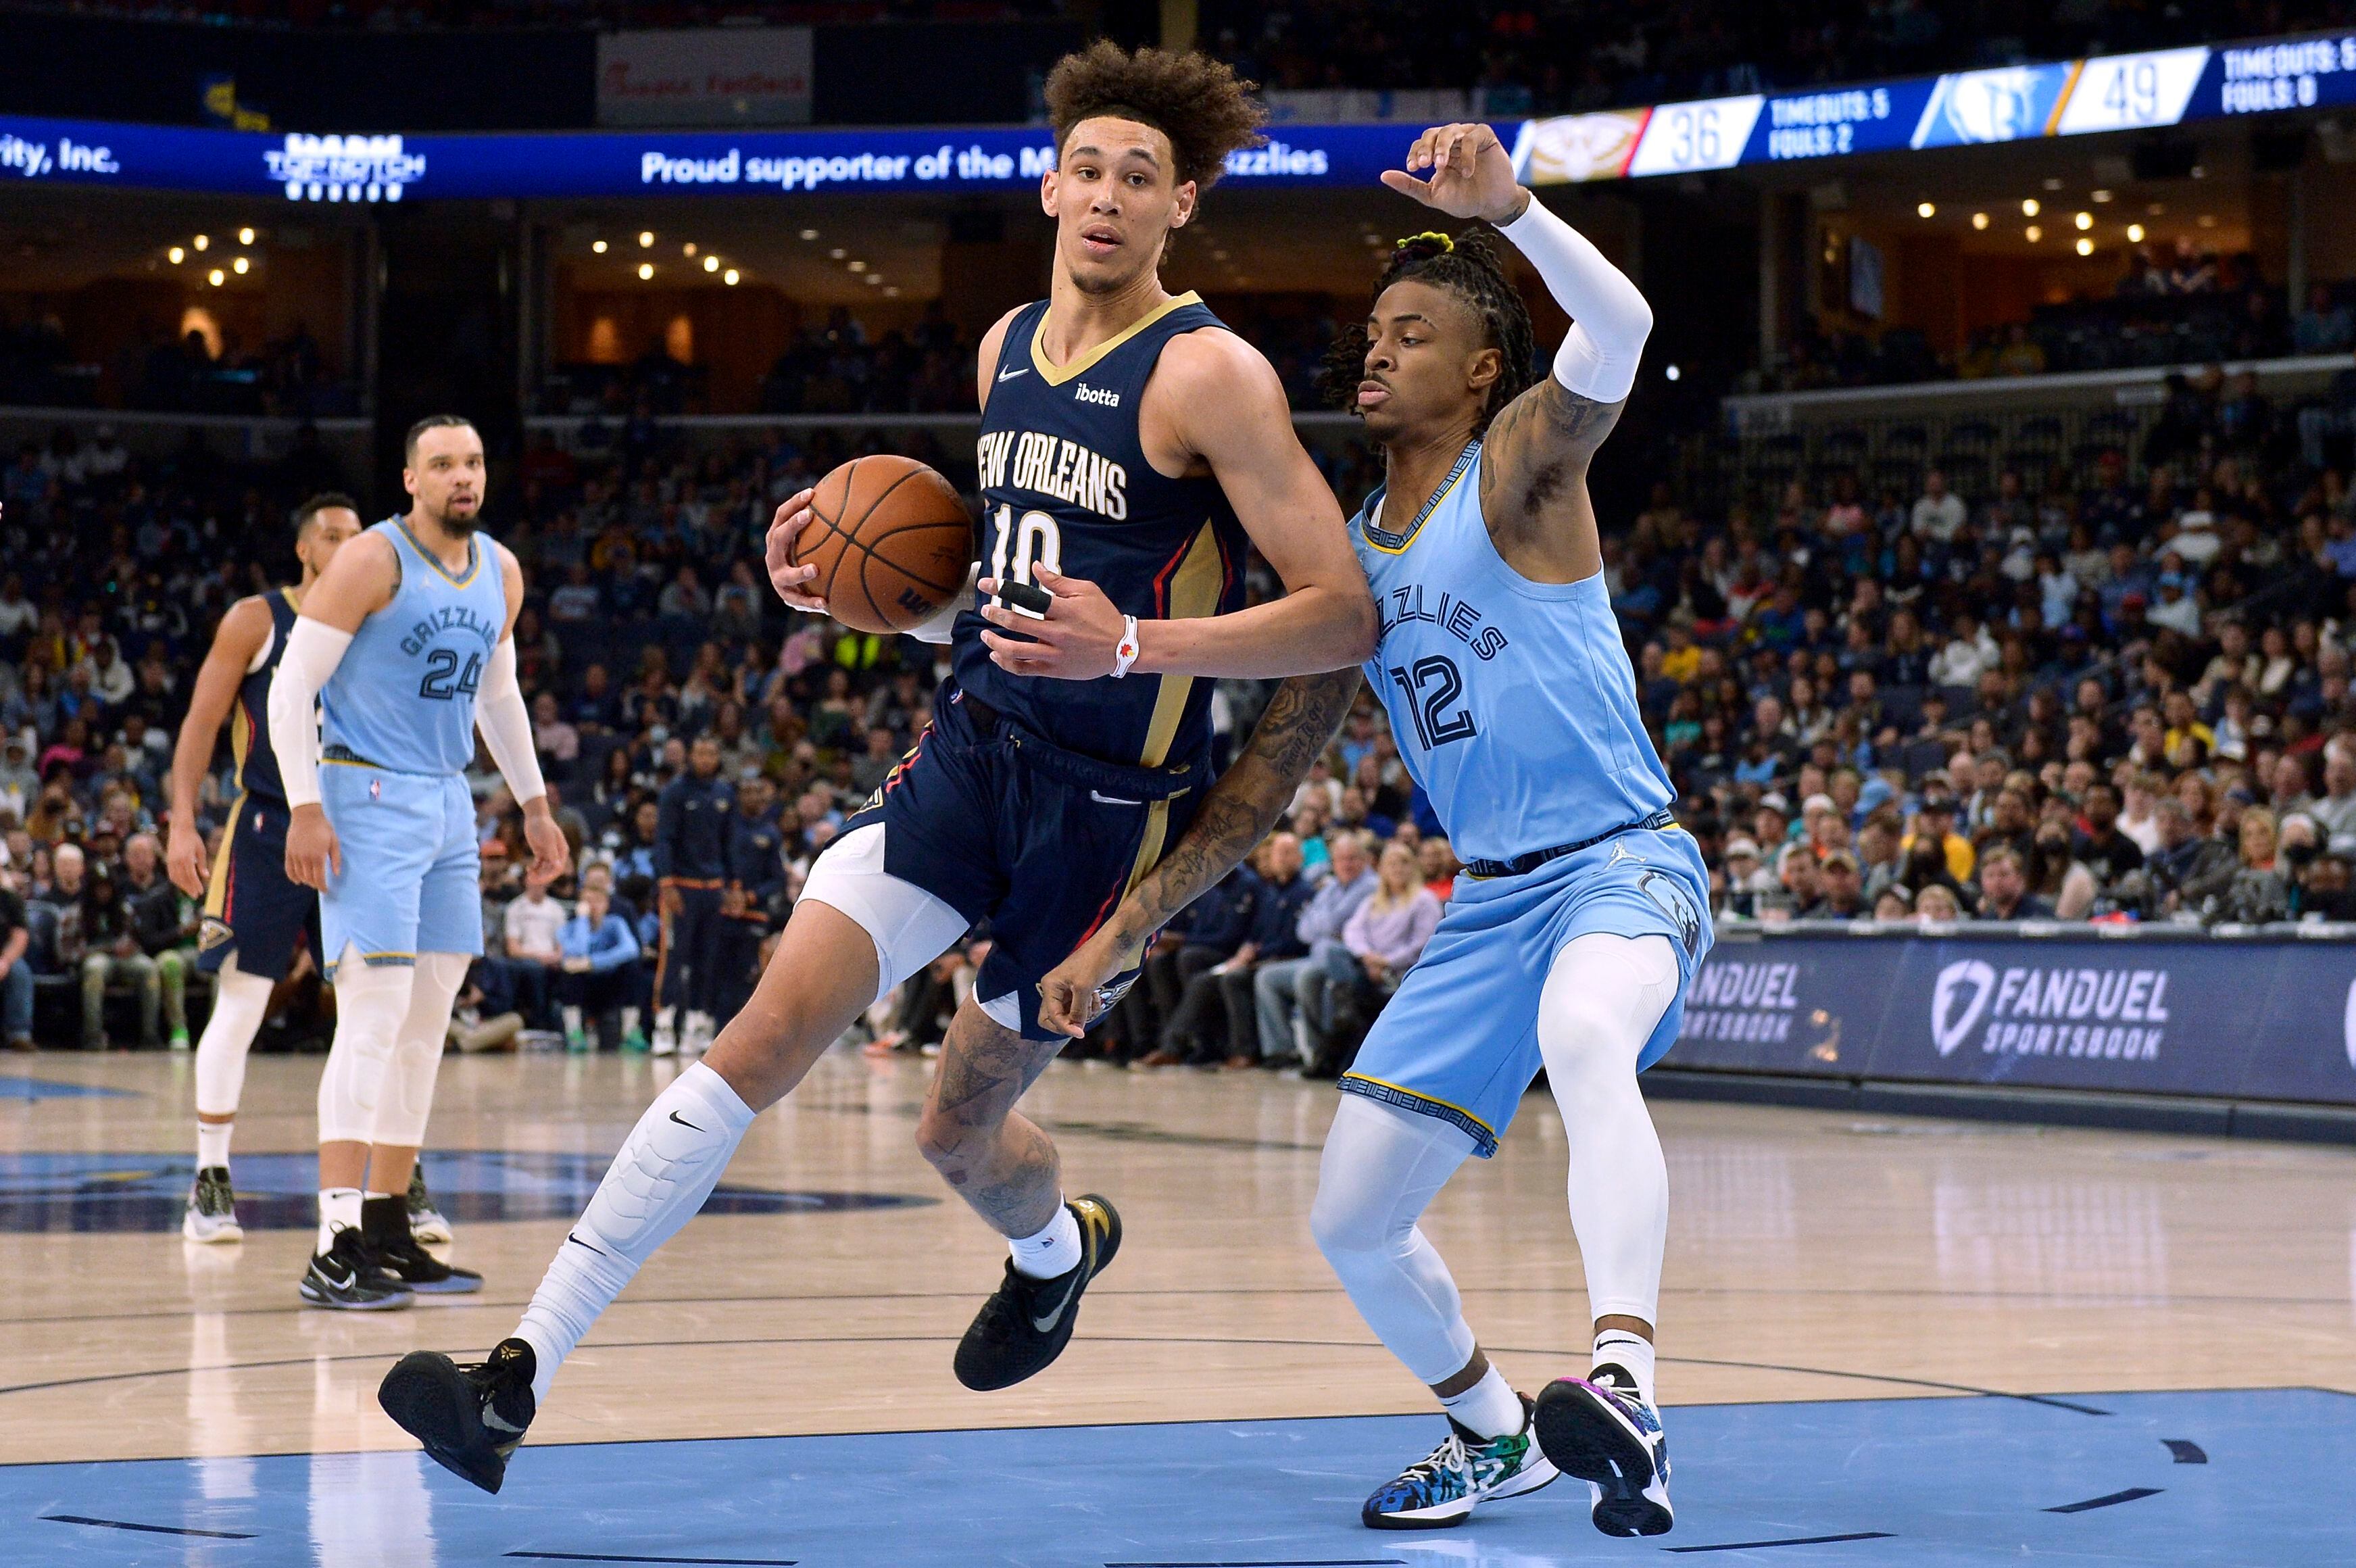 The Grizzlies Look Ready to Compete—With Ja Morant or Not - The Ringer